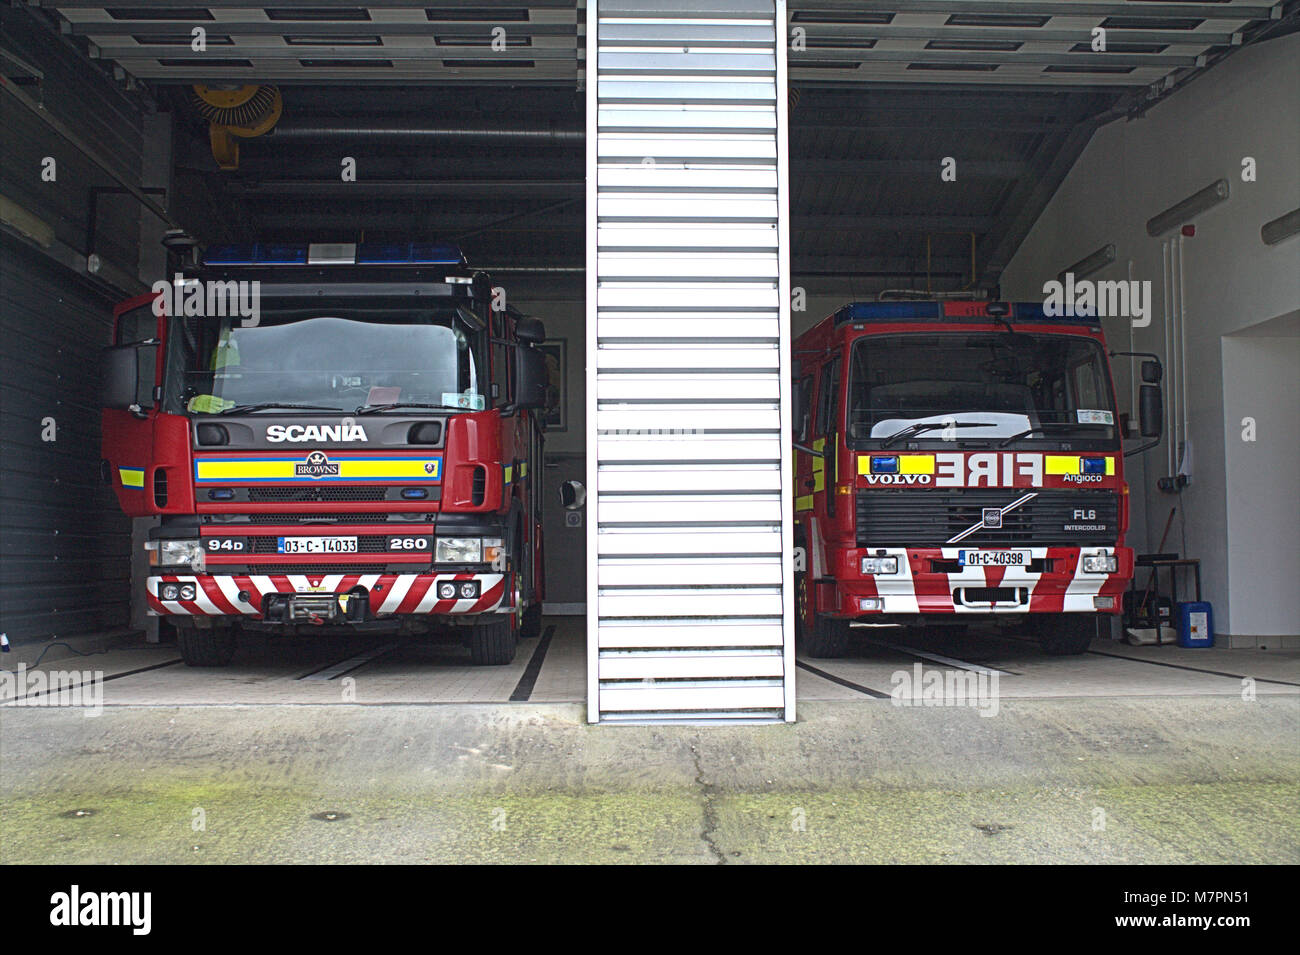 The local fire brigade trucks at the fire station on standby in Skibbereen, West Cork, Ireland. Stock Photo